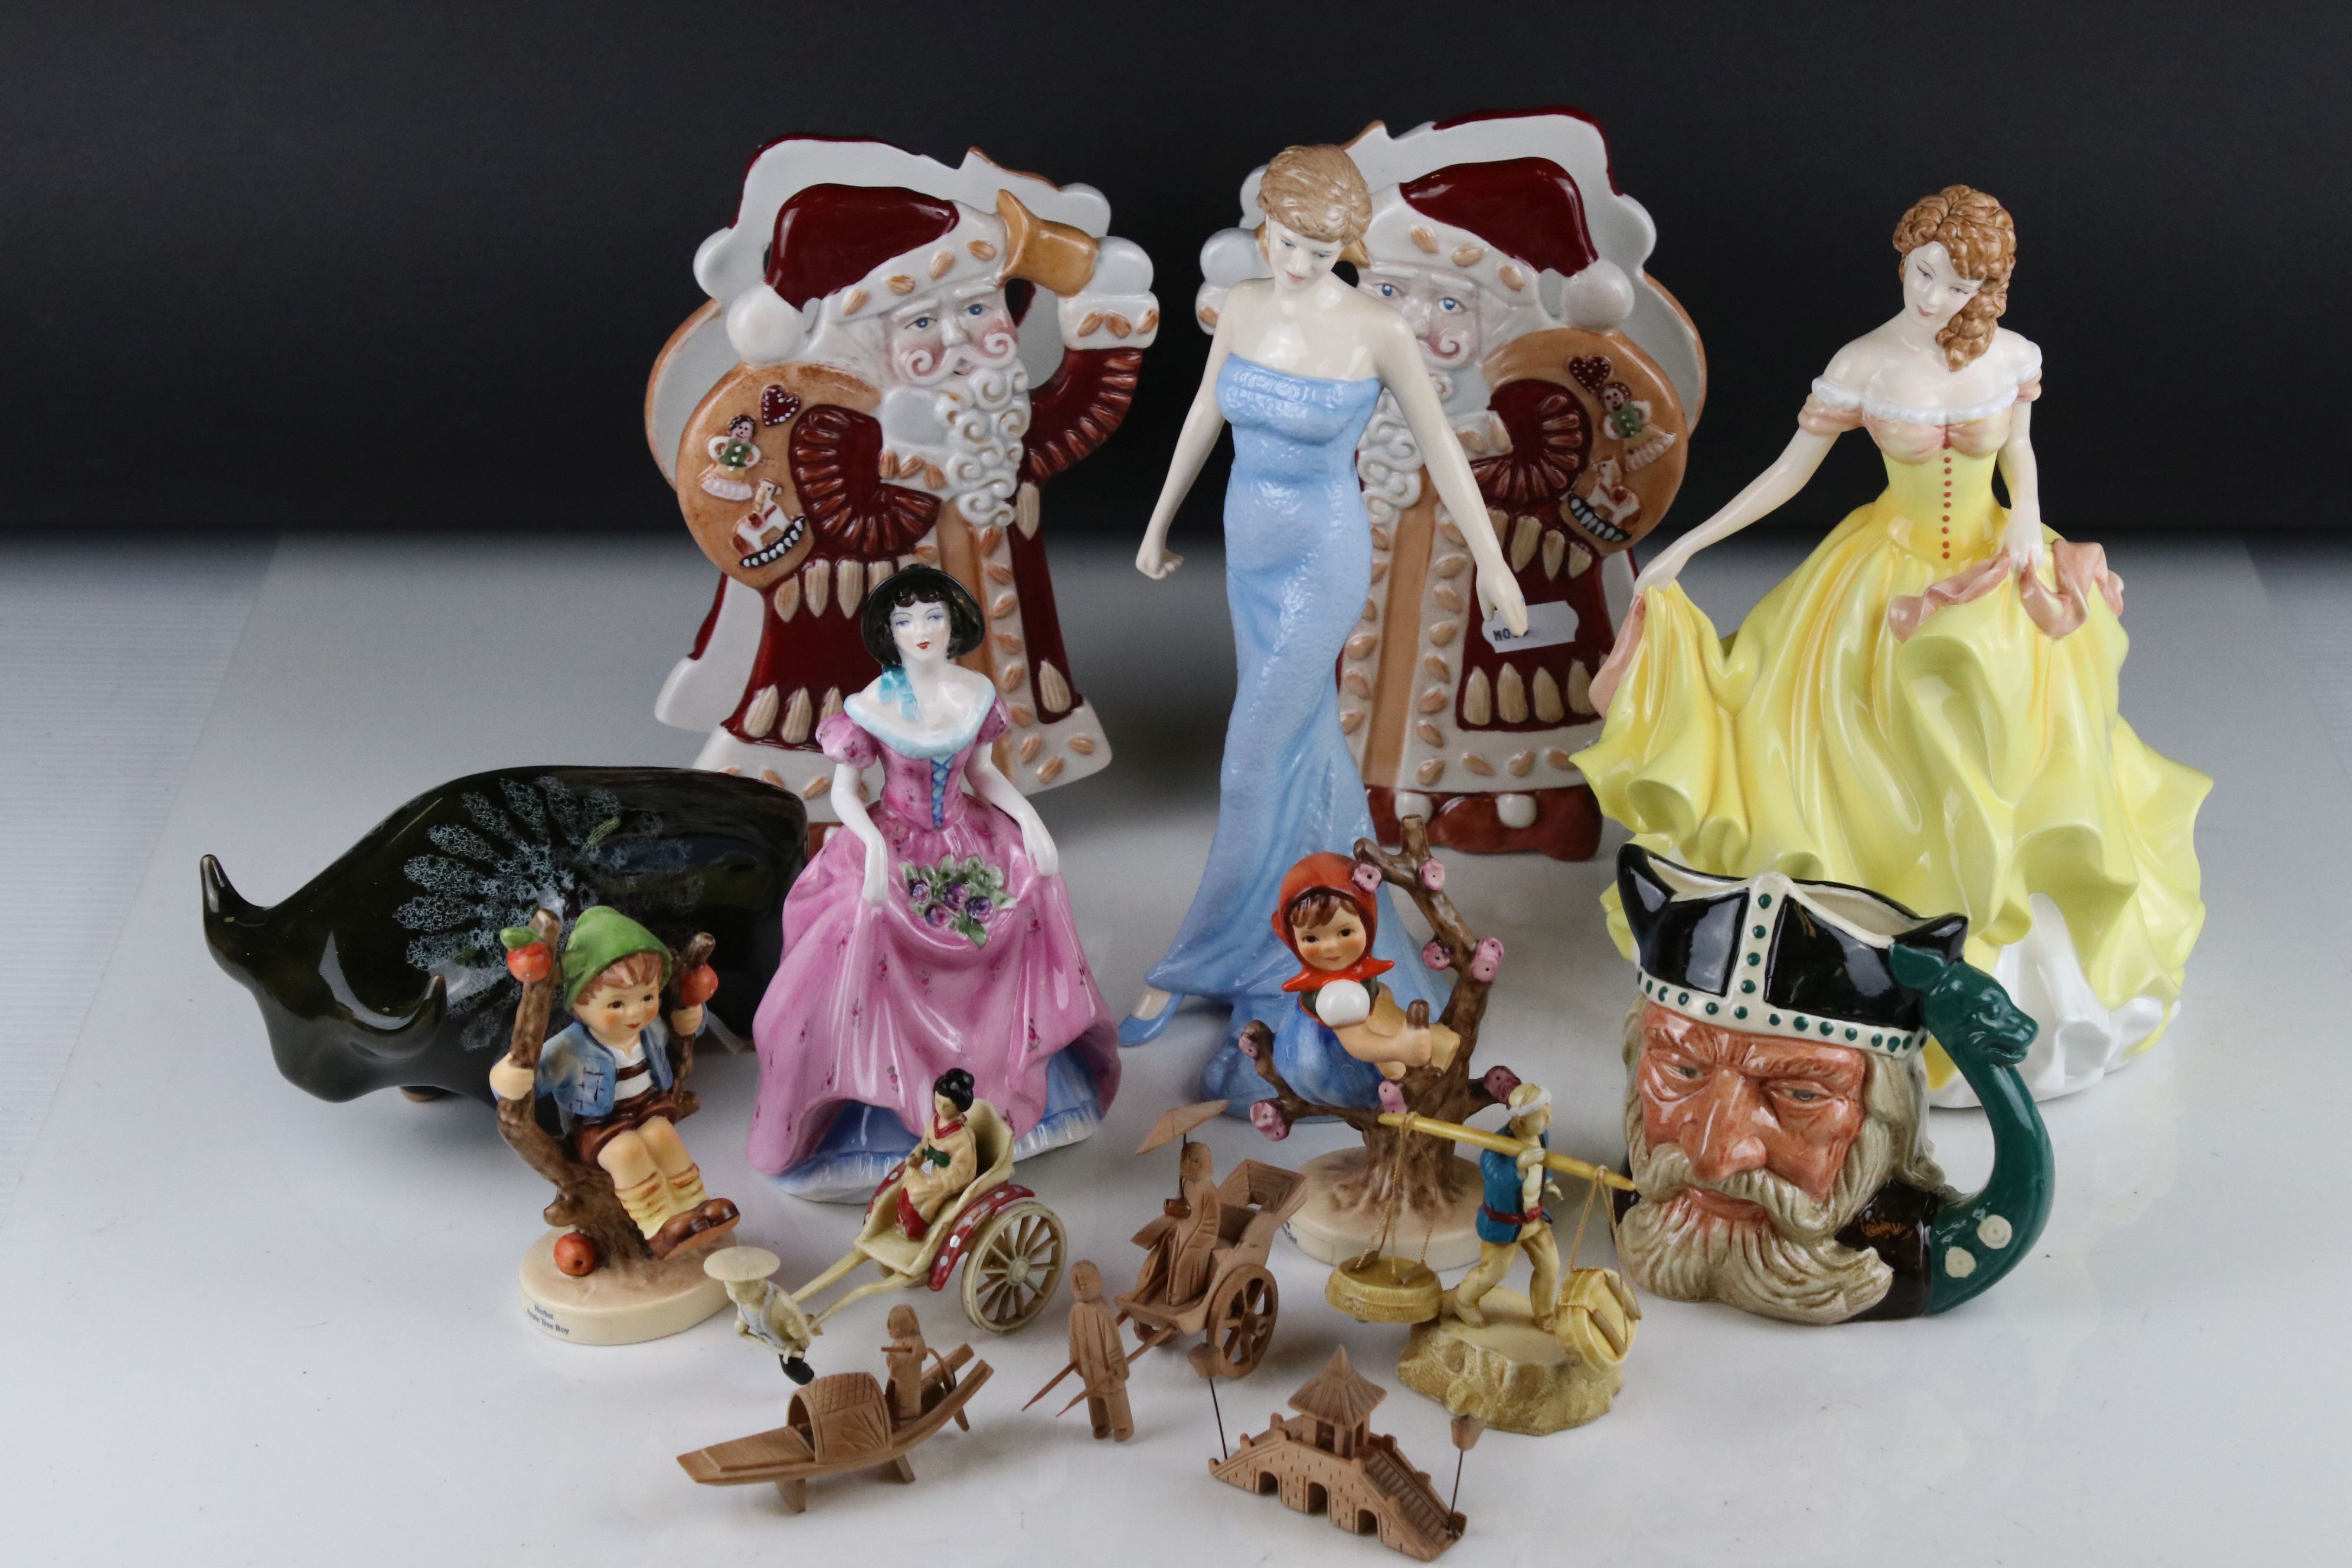 Mixed Lot of Ceramics including Two Royal Doulton Figurines and a Coalport Figurine, Pair of